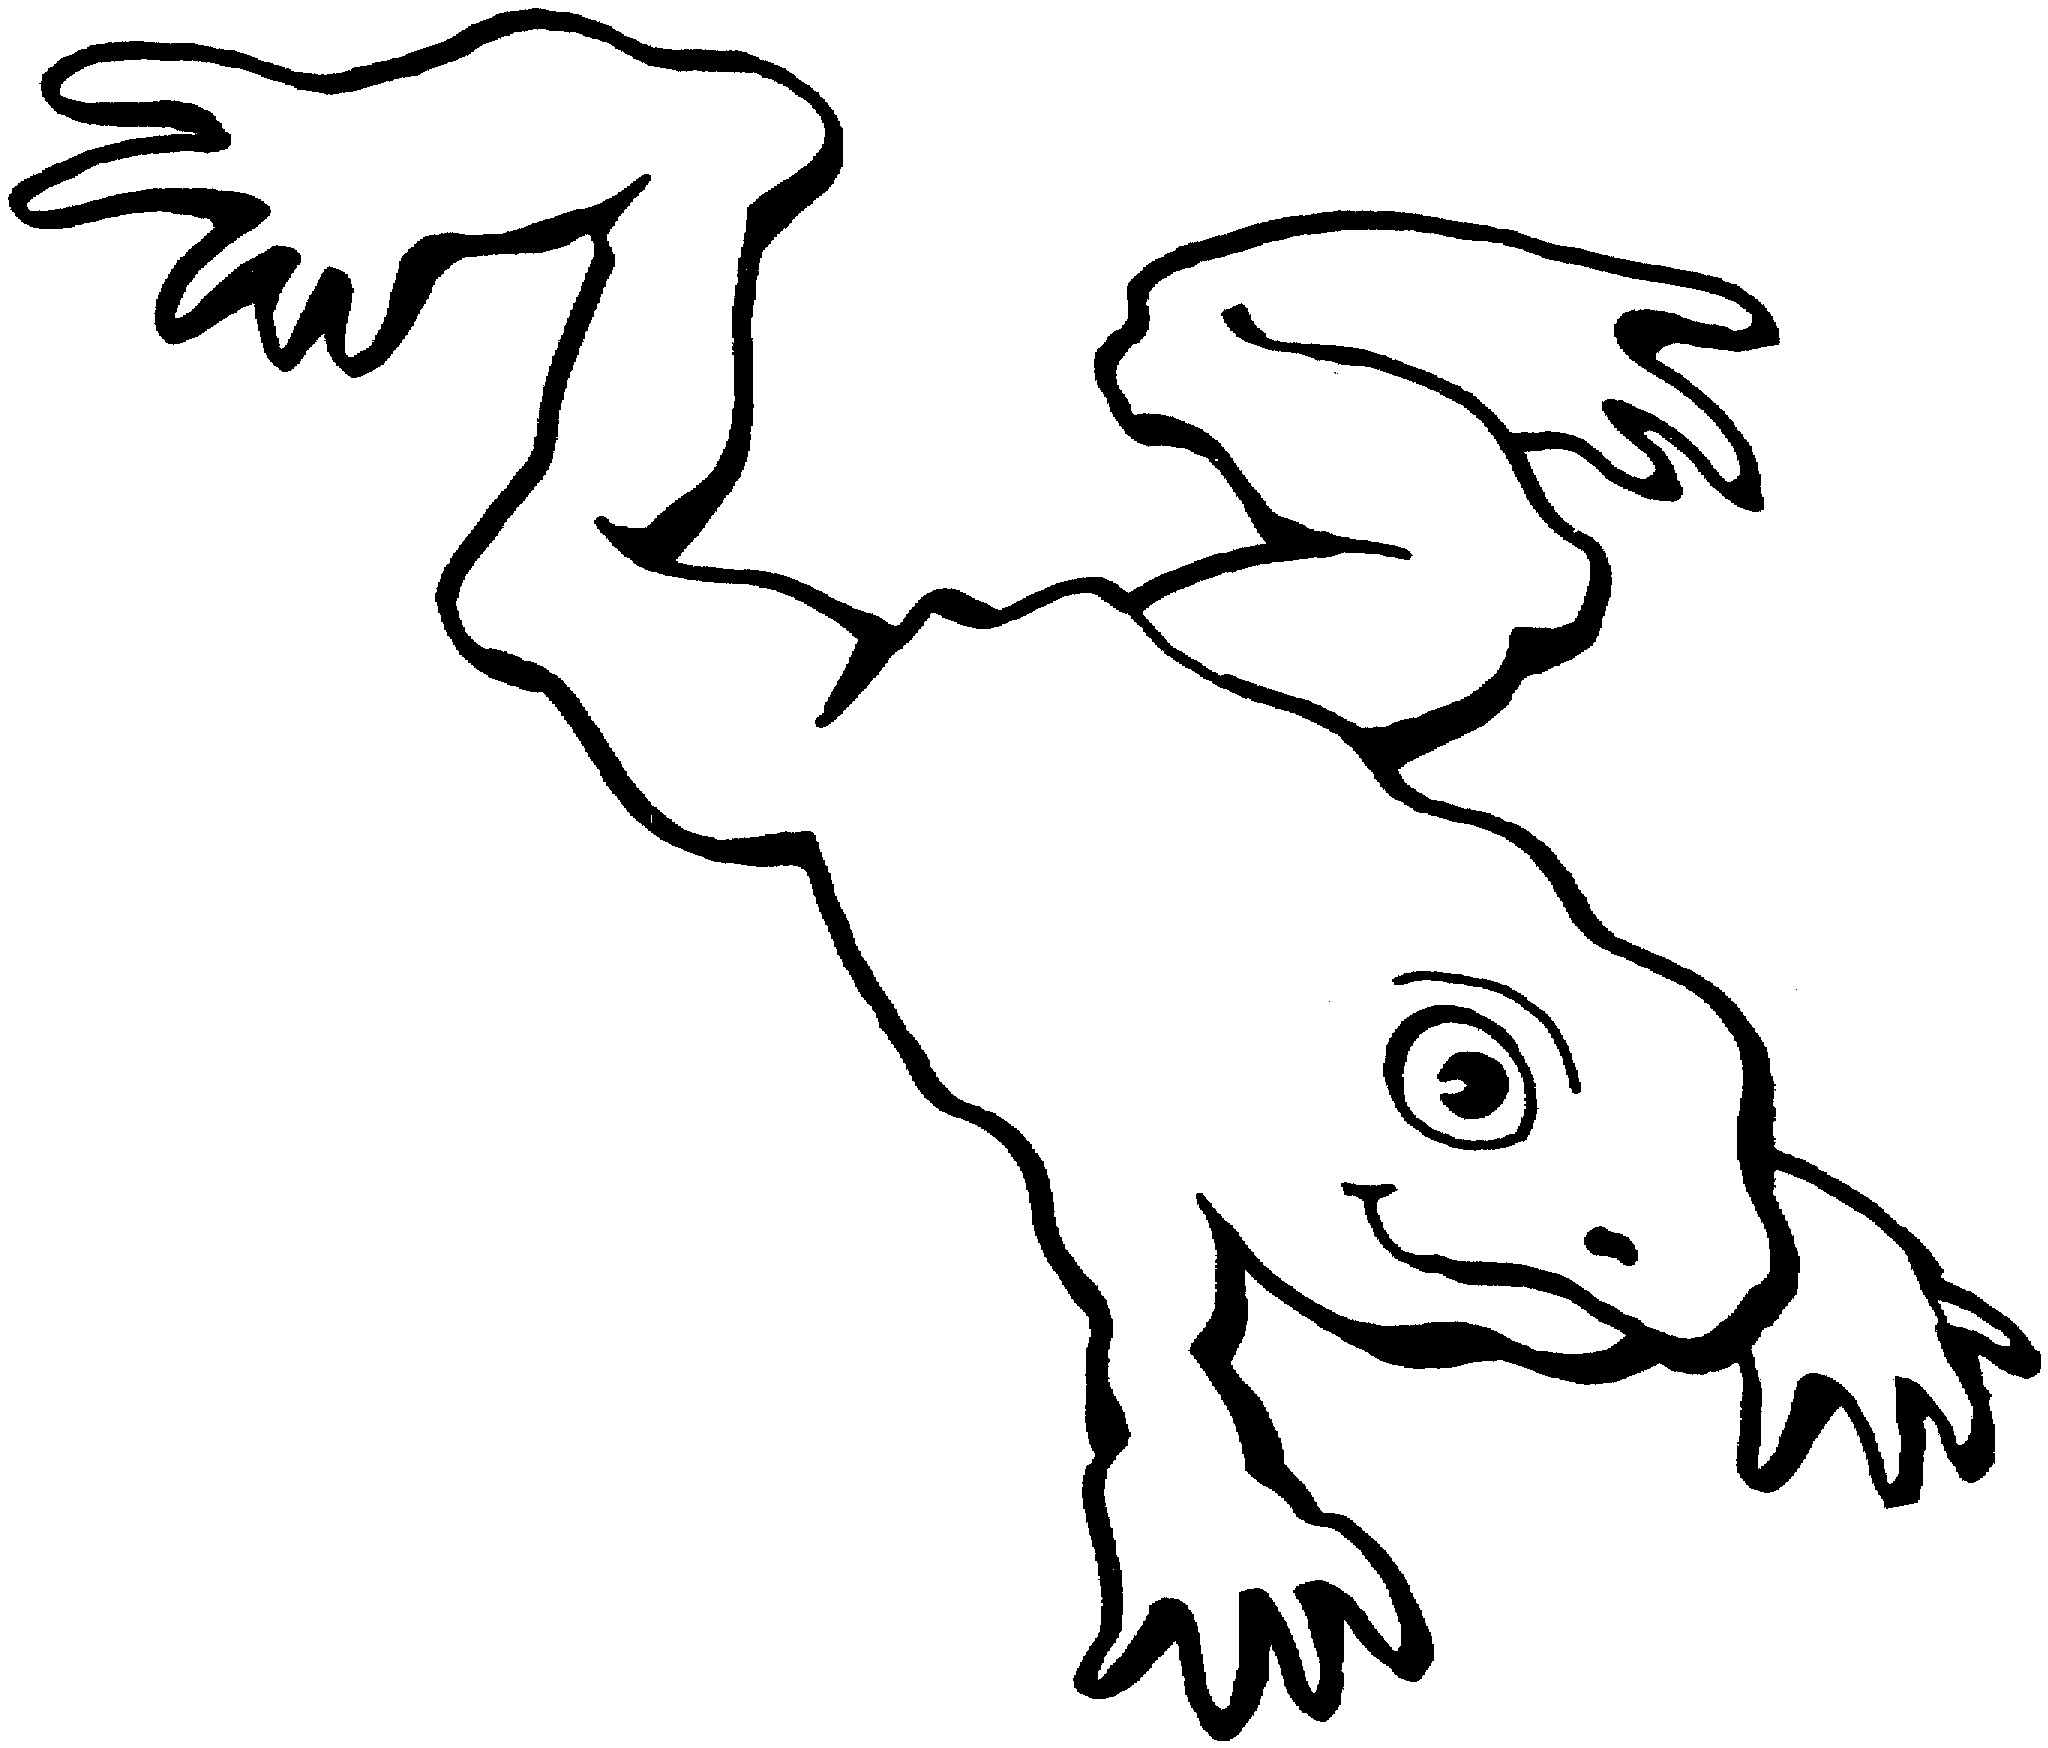 jumping frog coloring page